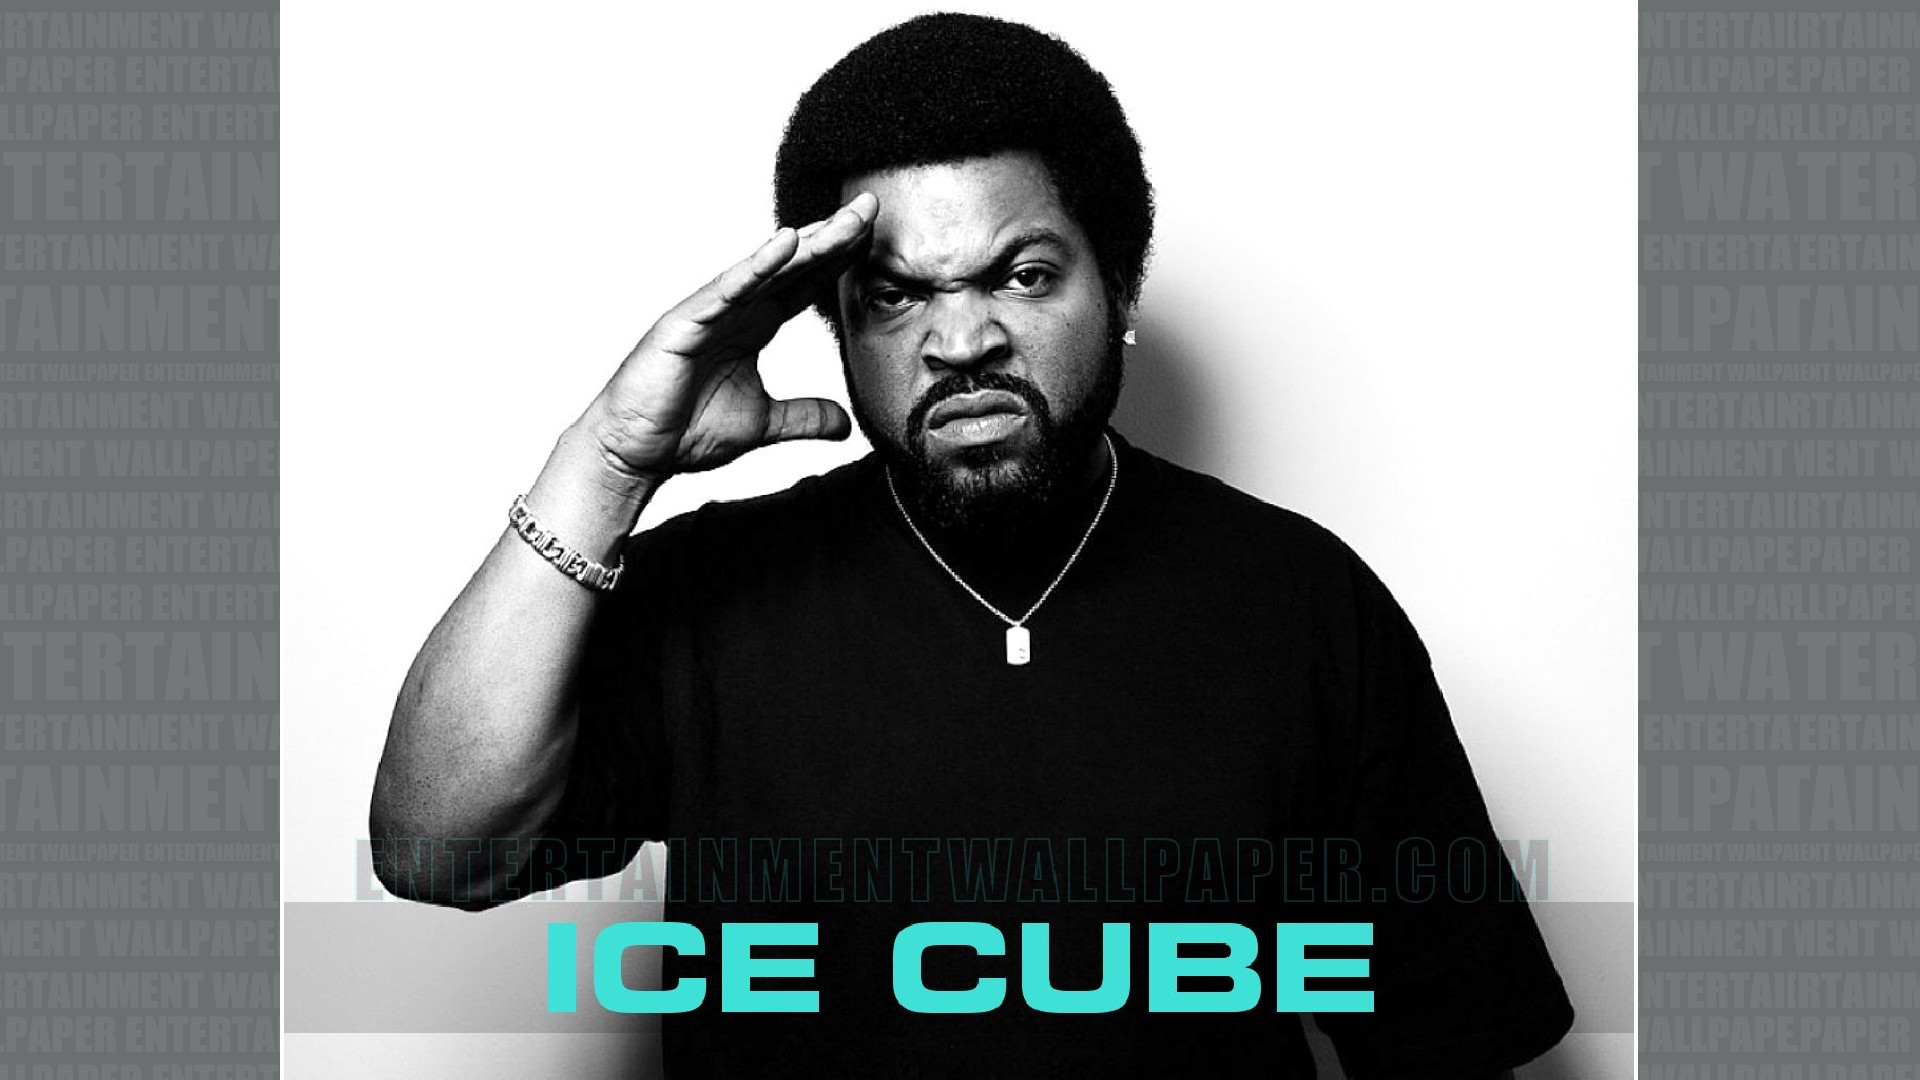 1920x1080 Ice Cube Wallpaper - Original size, download now.